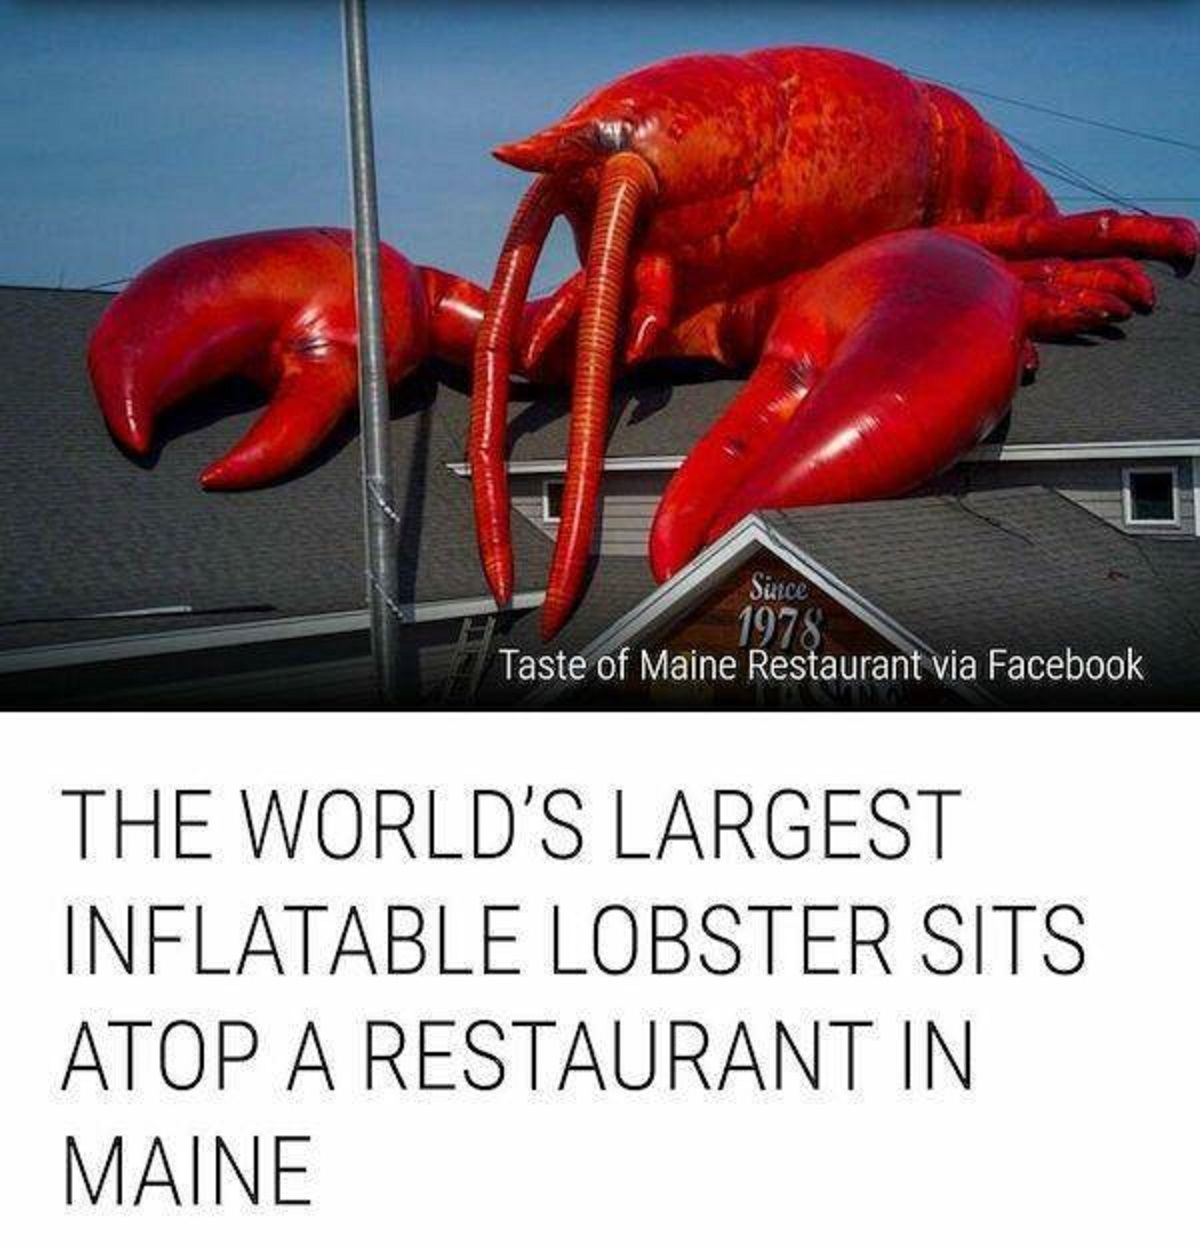 taste of maine restaurant - Since 1978 Taste of Maine Restaurant via Facebook The World'S Largest Inflatable Lobster Sits Atop A Restaurant In Maine